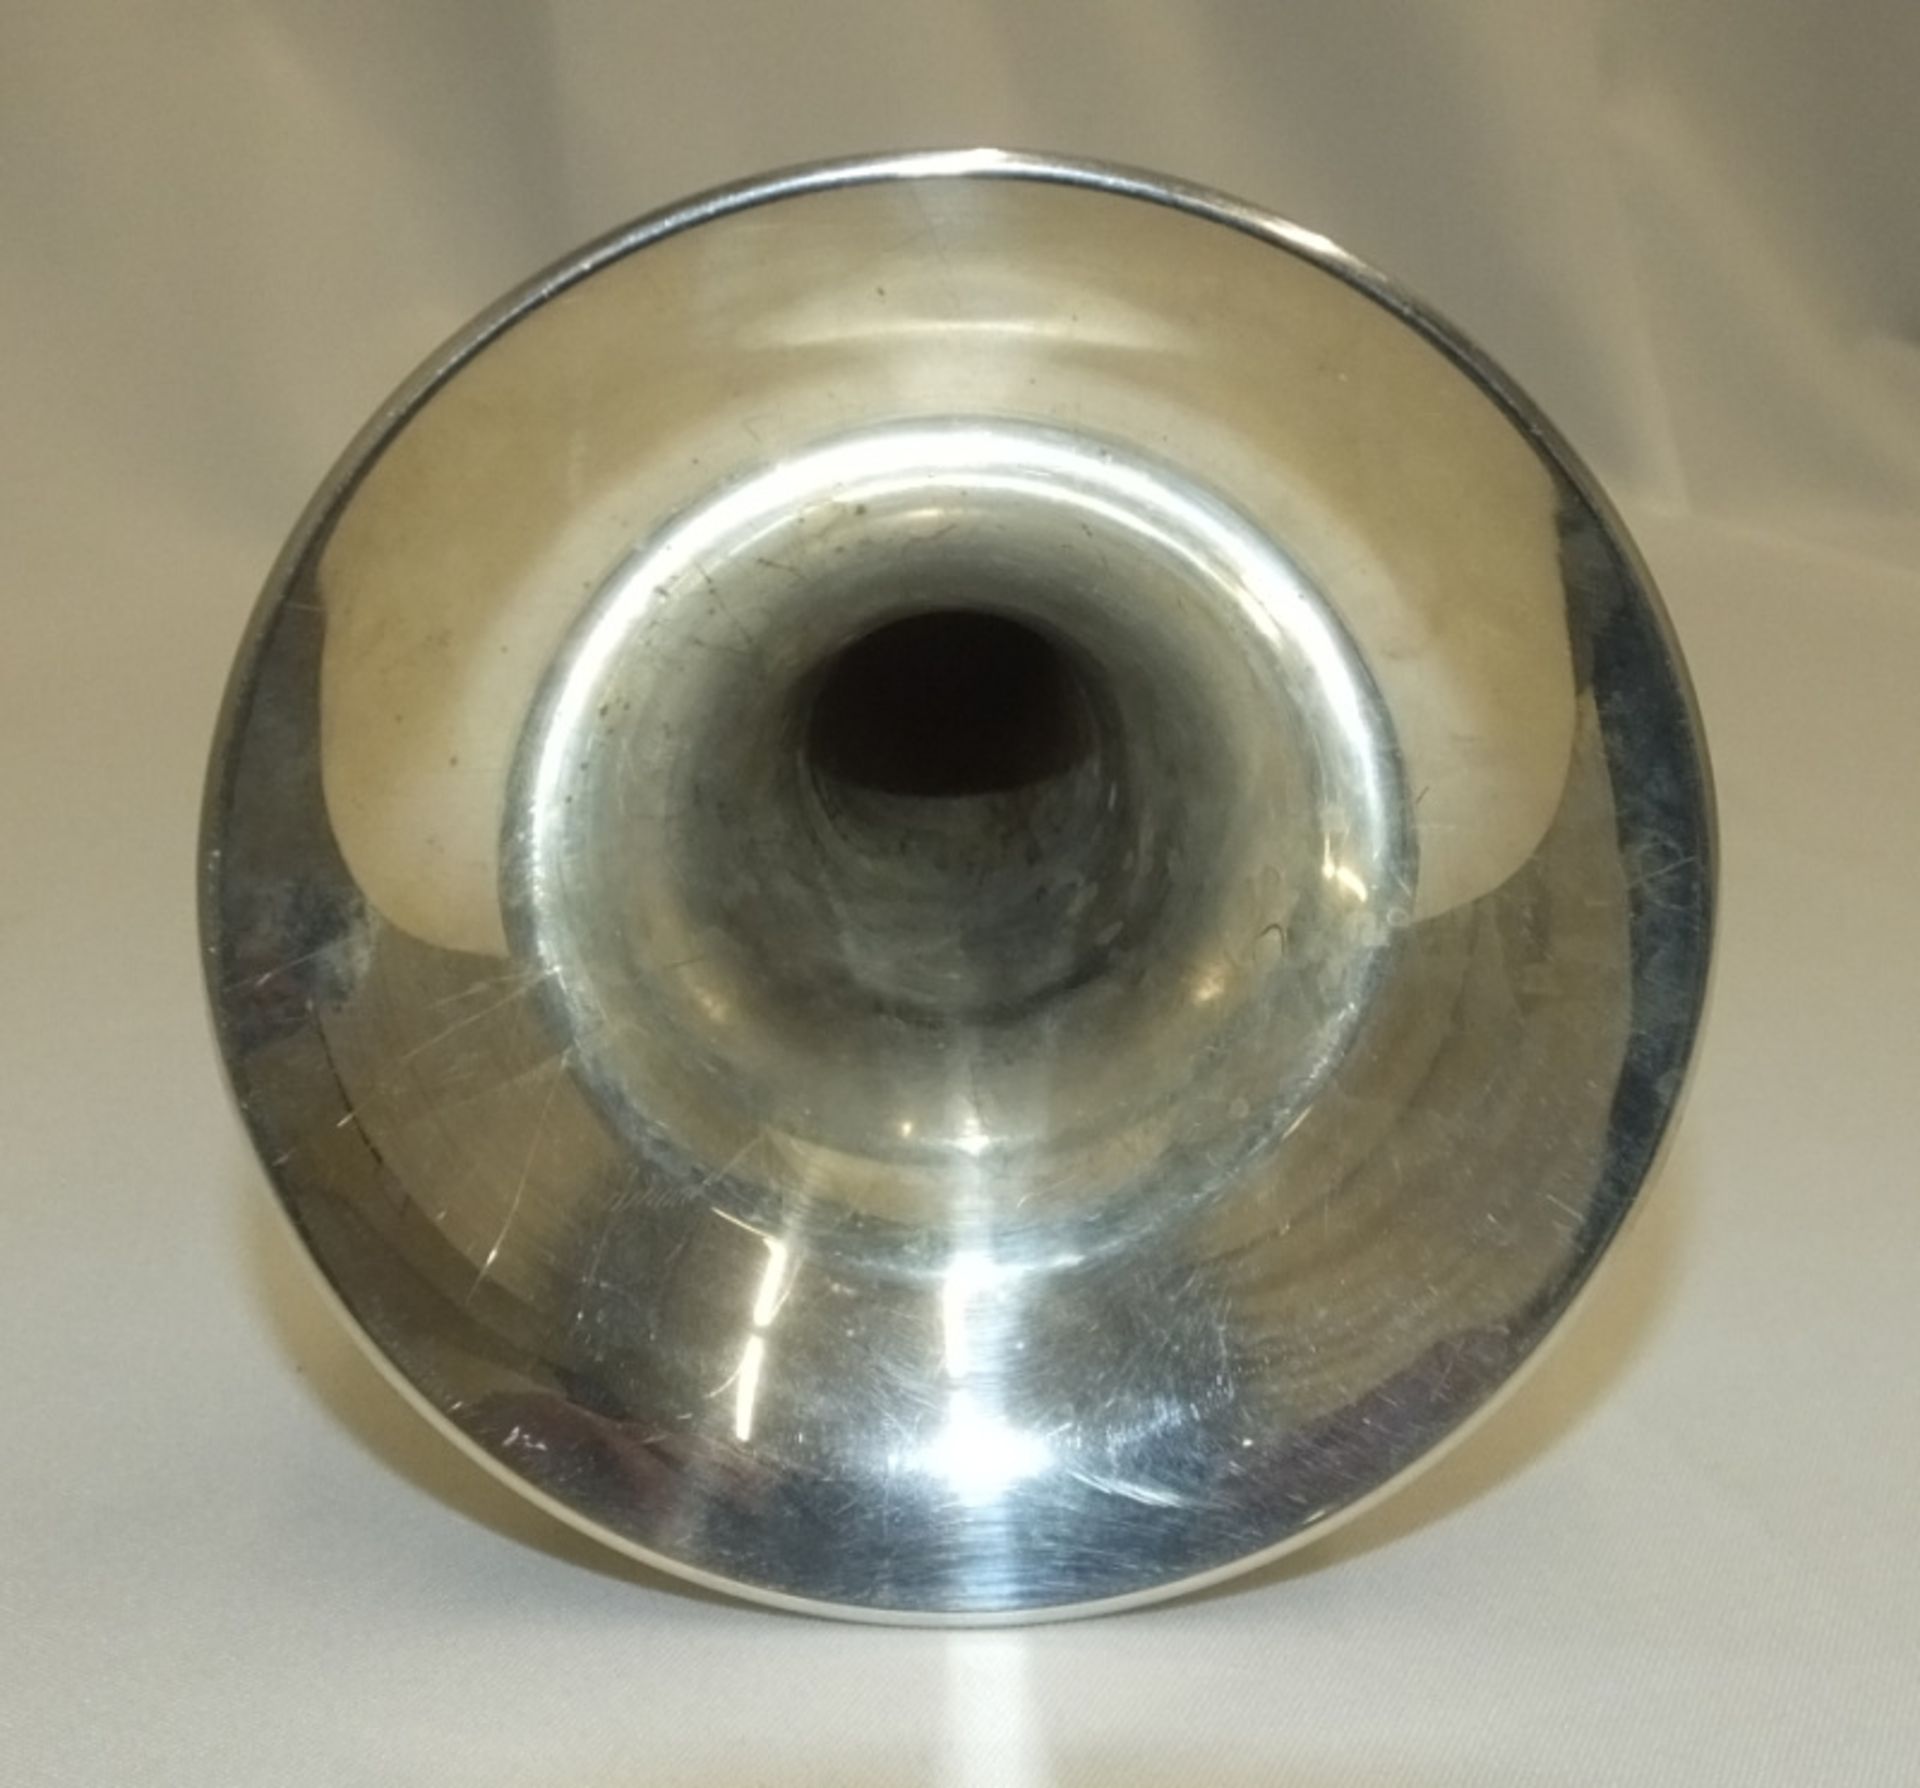 Yamaha T100S Trumpet in case - serial number 213249 - Please check photos carefully - Image 8 of 10